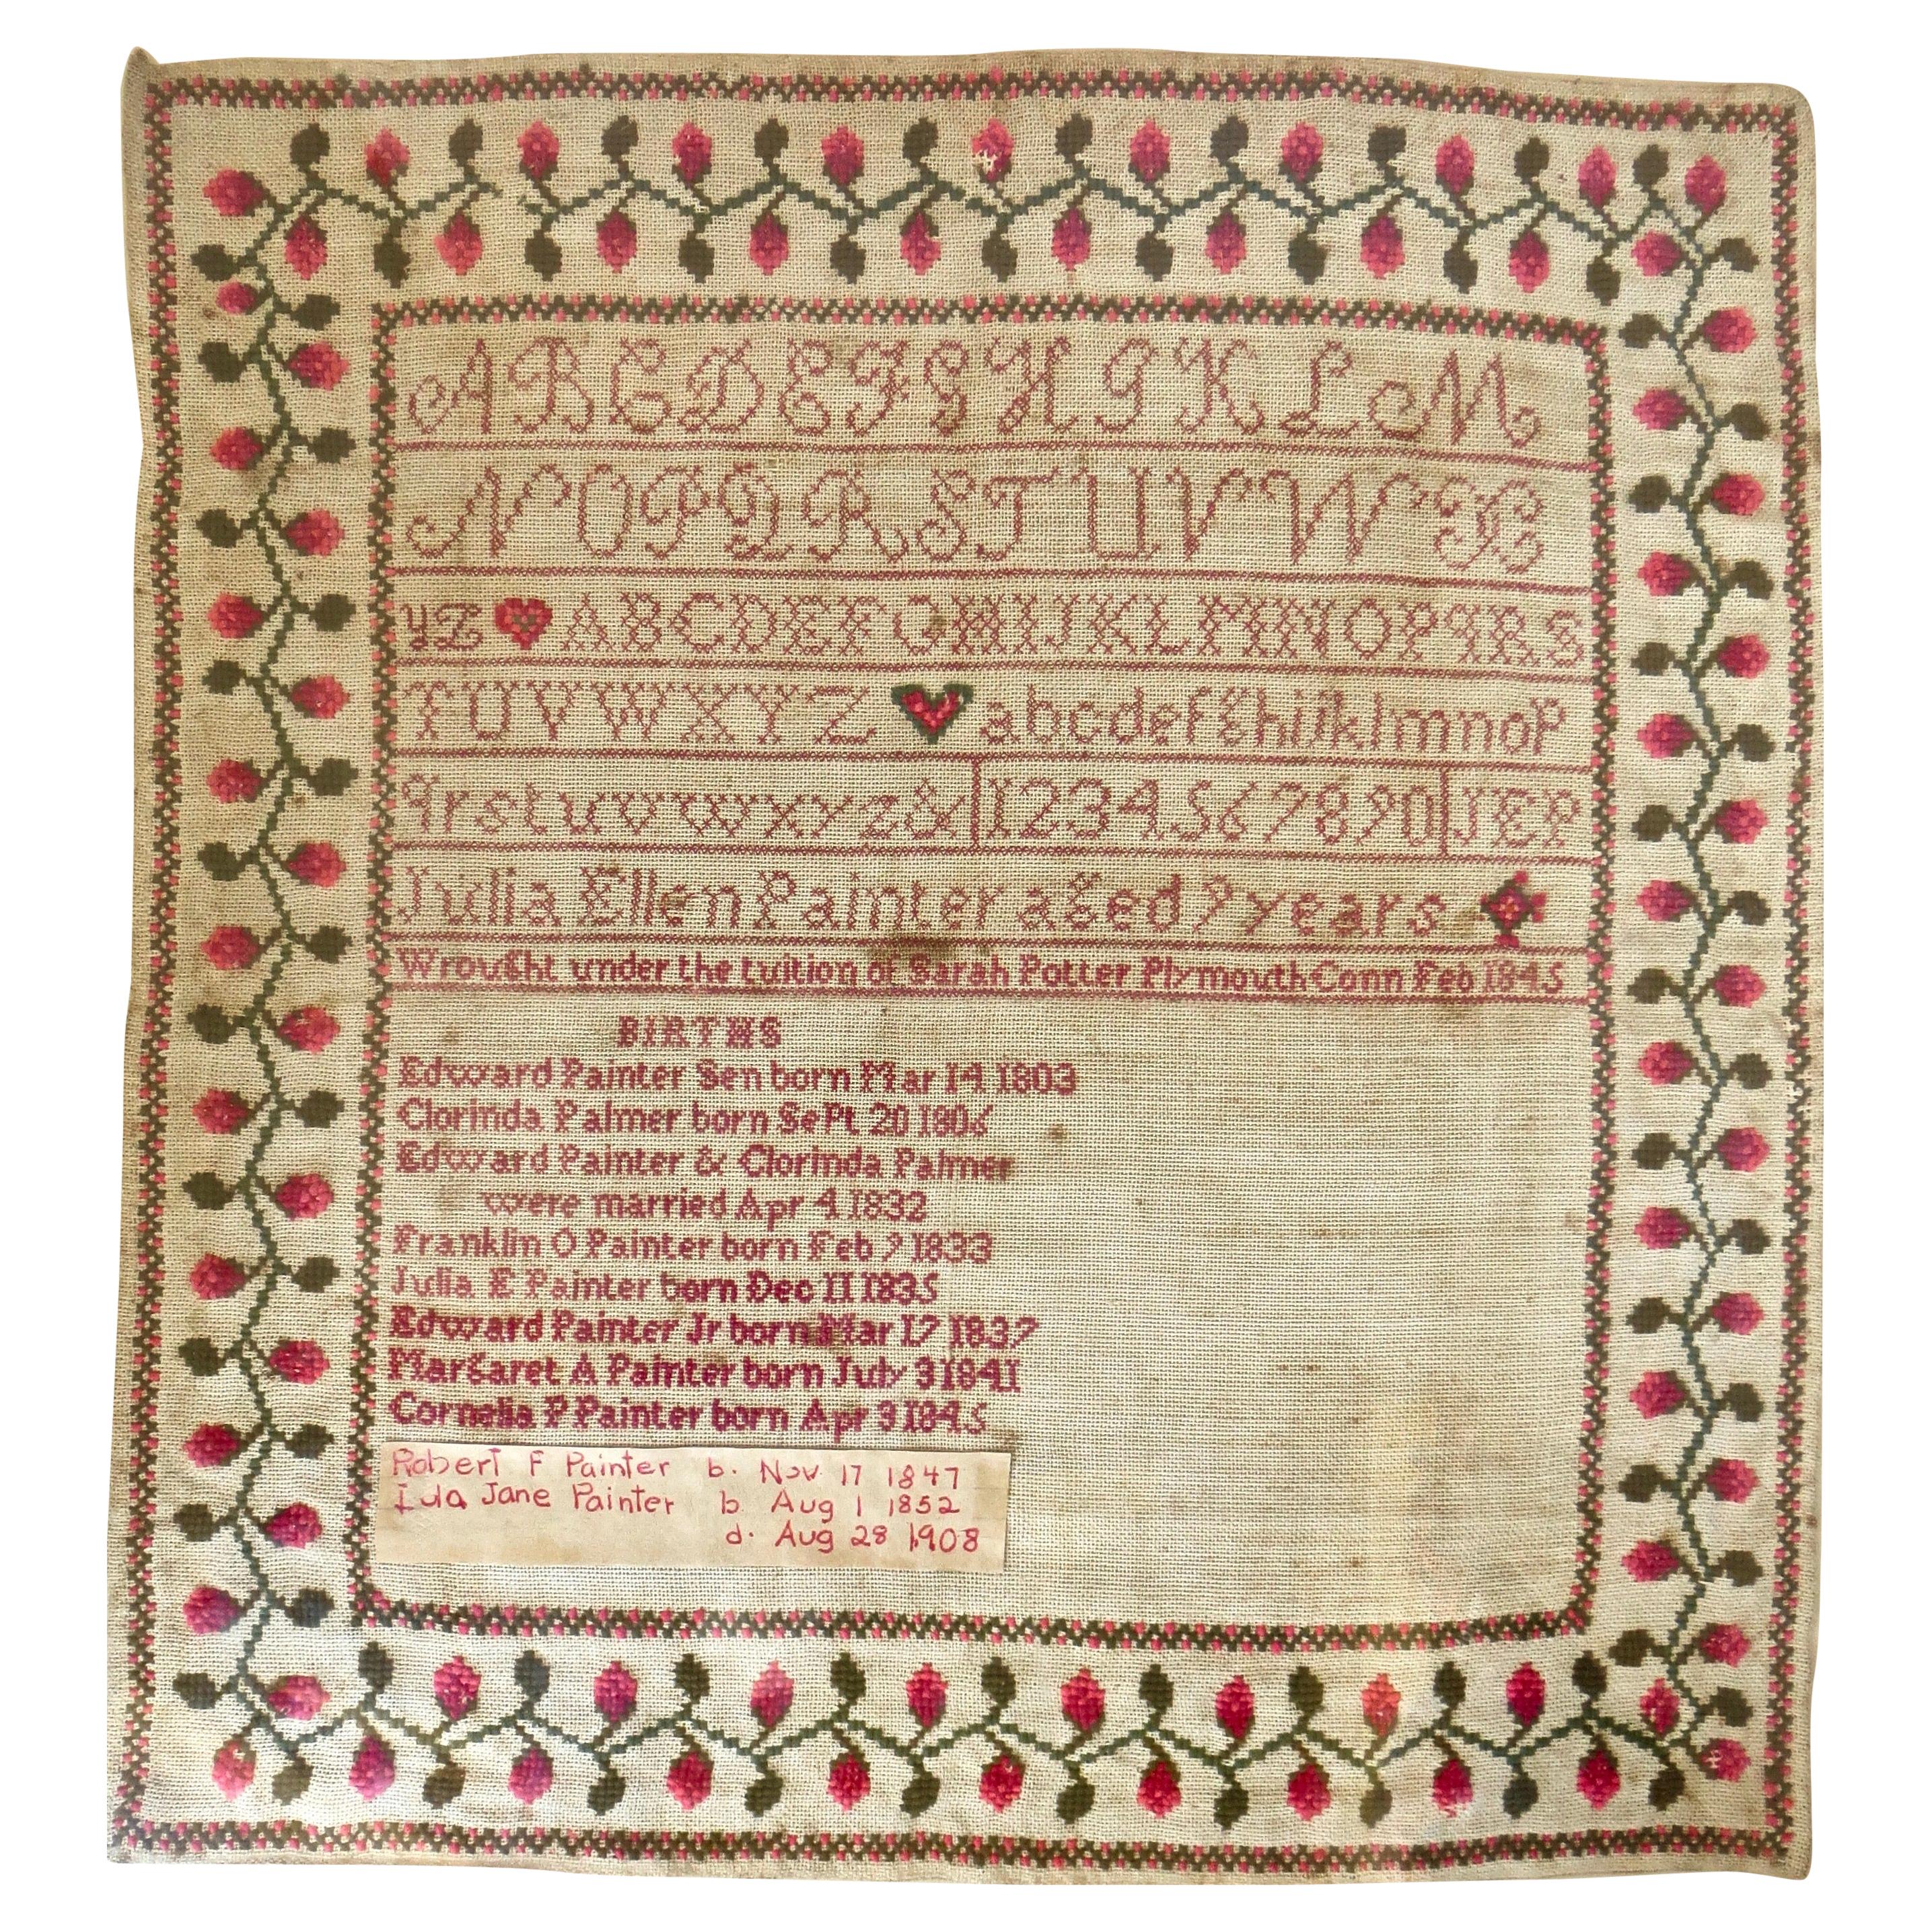 American Child's Sampler, Circa 1845 by "Julia Ellen Painter Aged 9 Years Old"